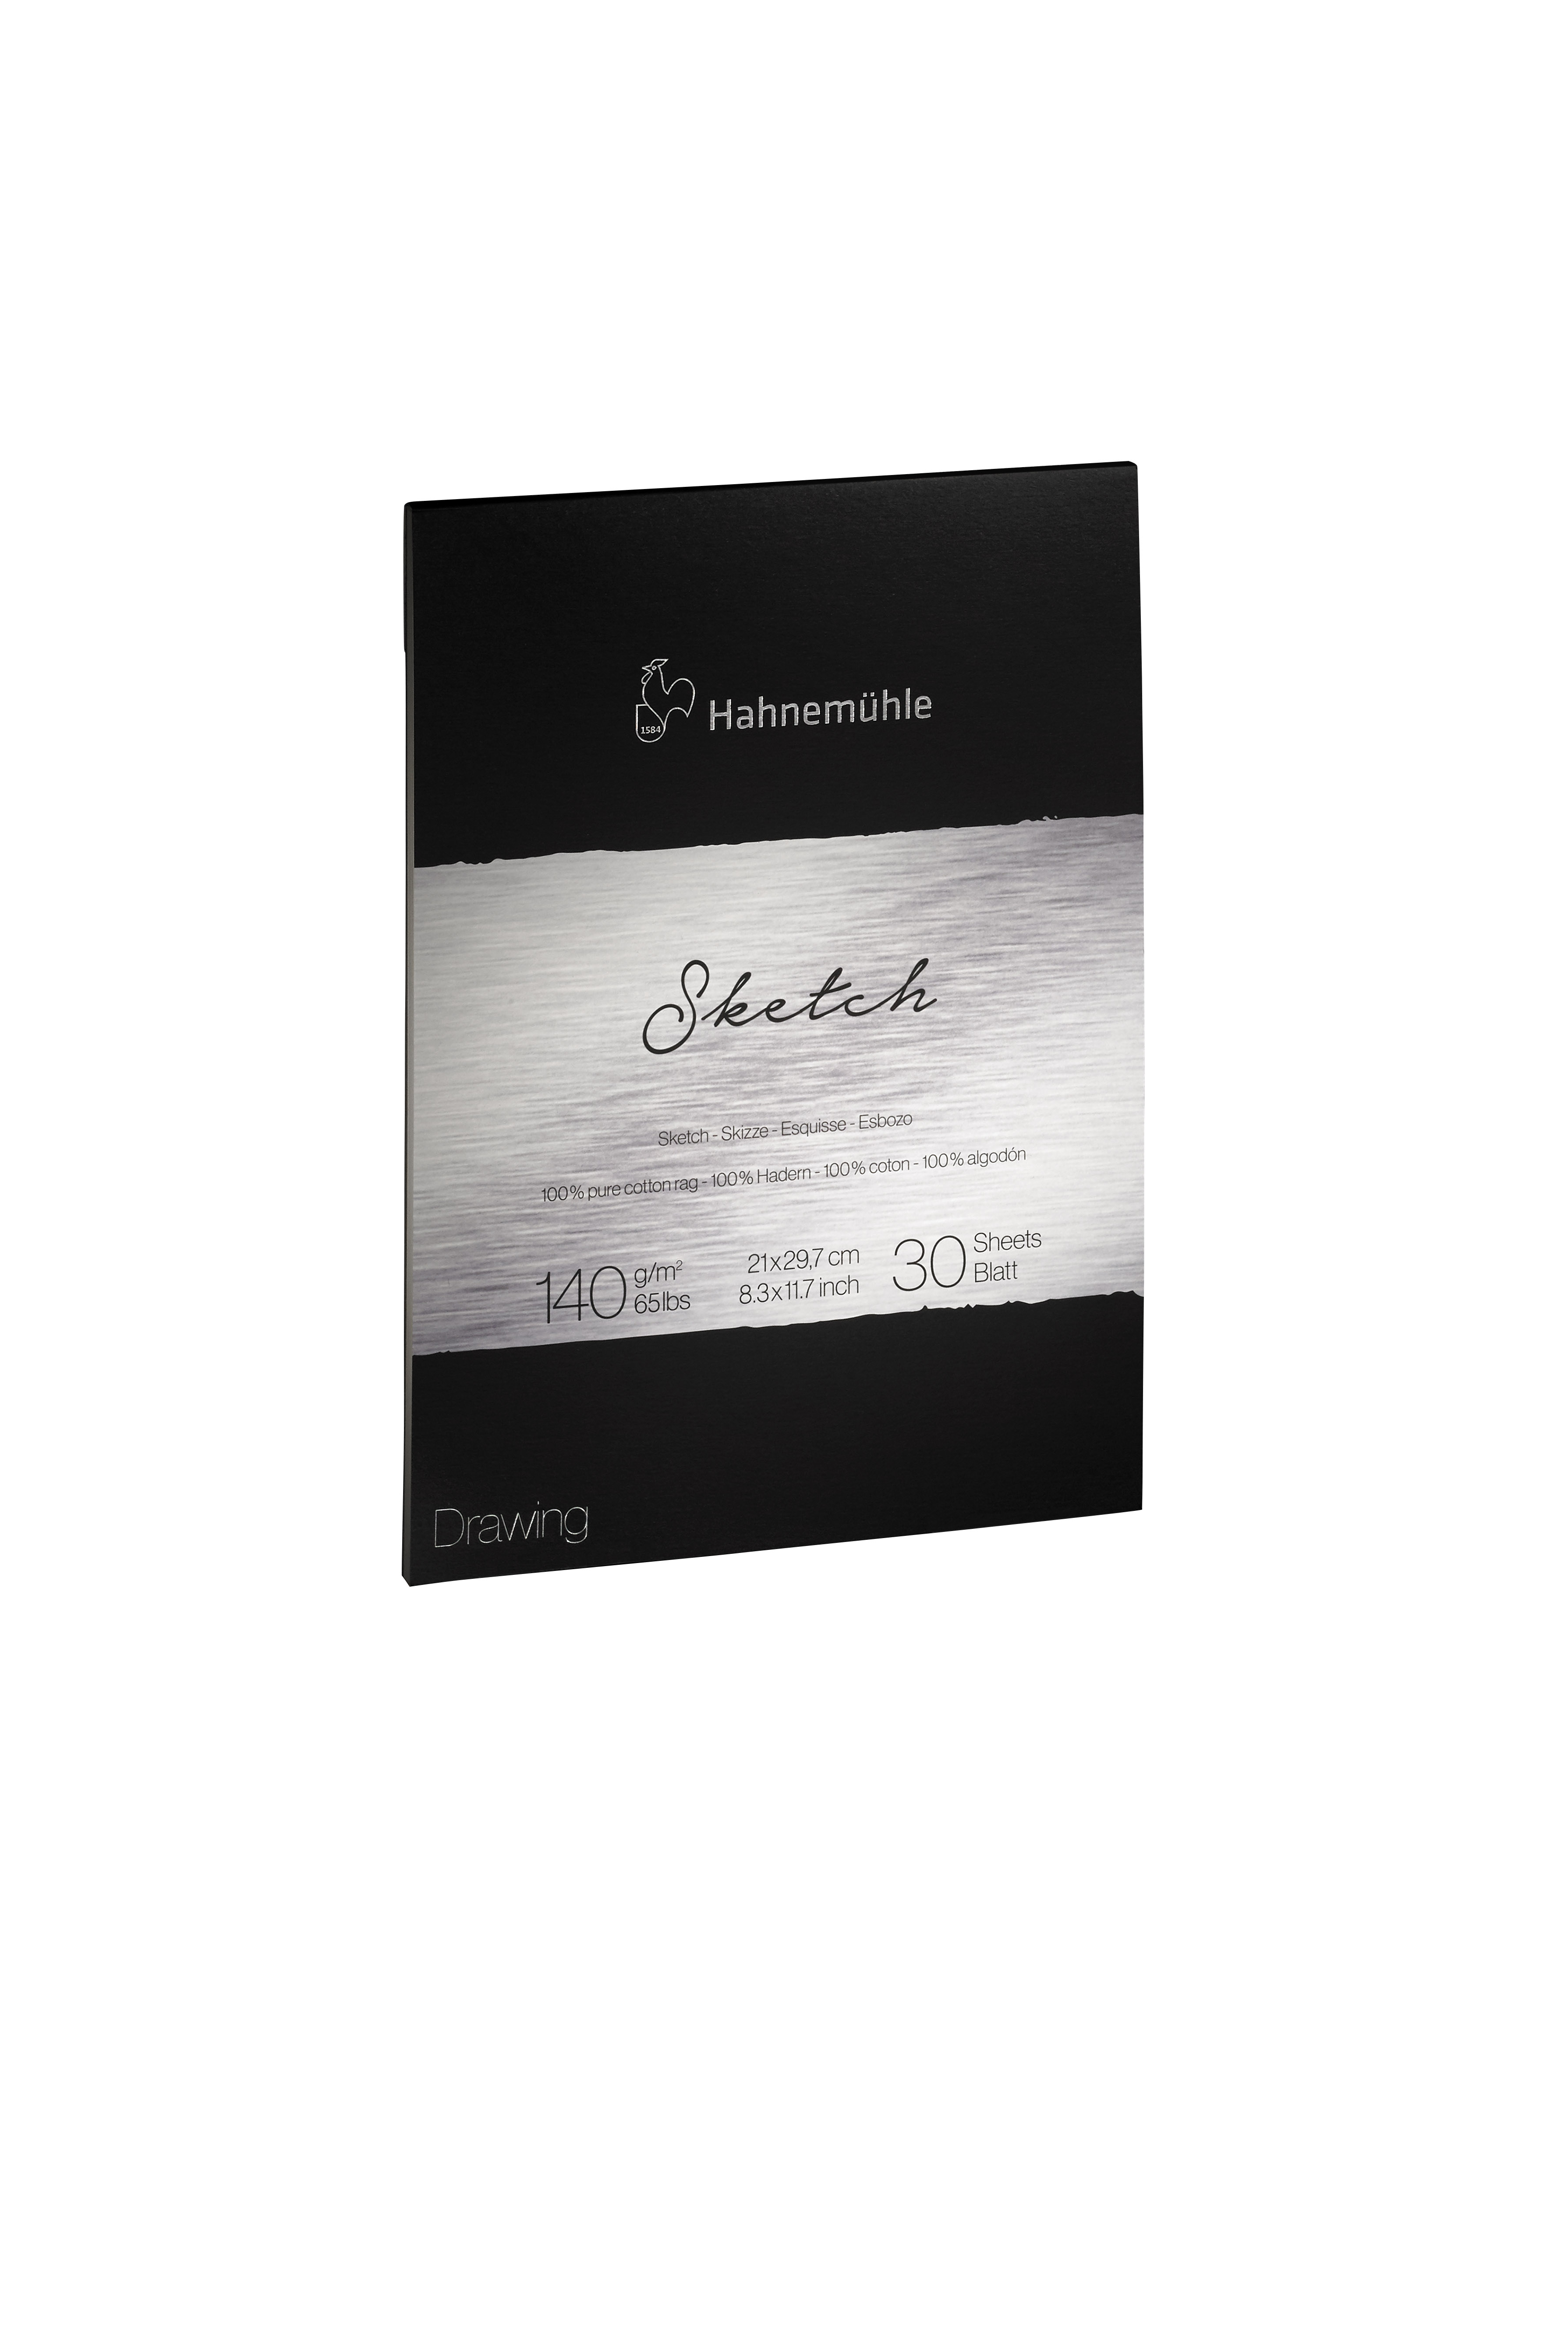 Hahnemu&#776;hle Collection Sketch Pad 8x11 30 sheets